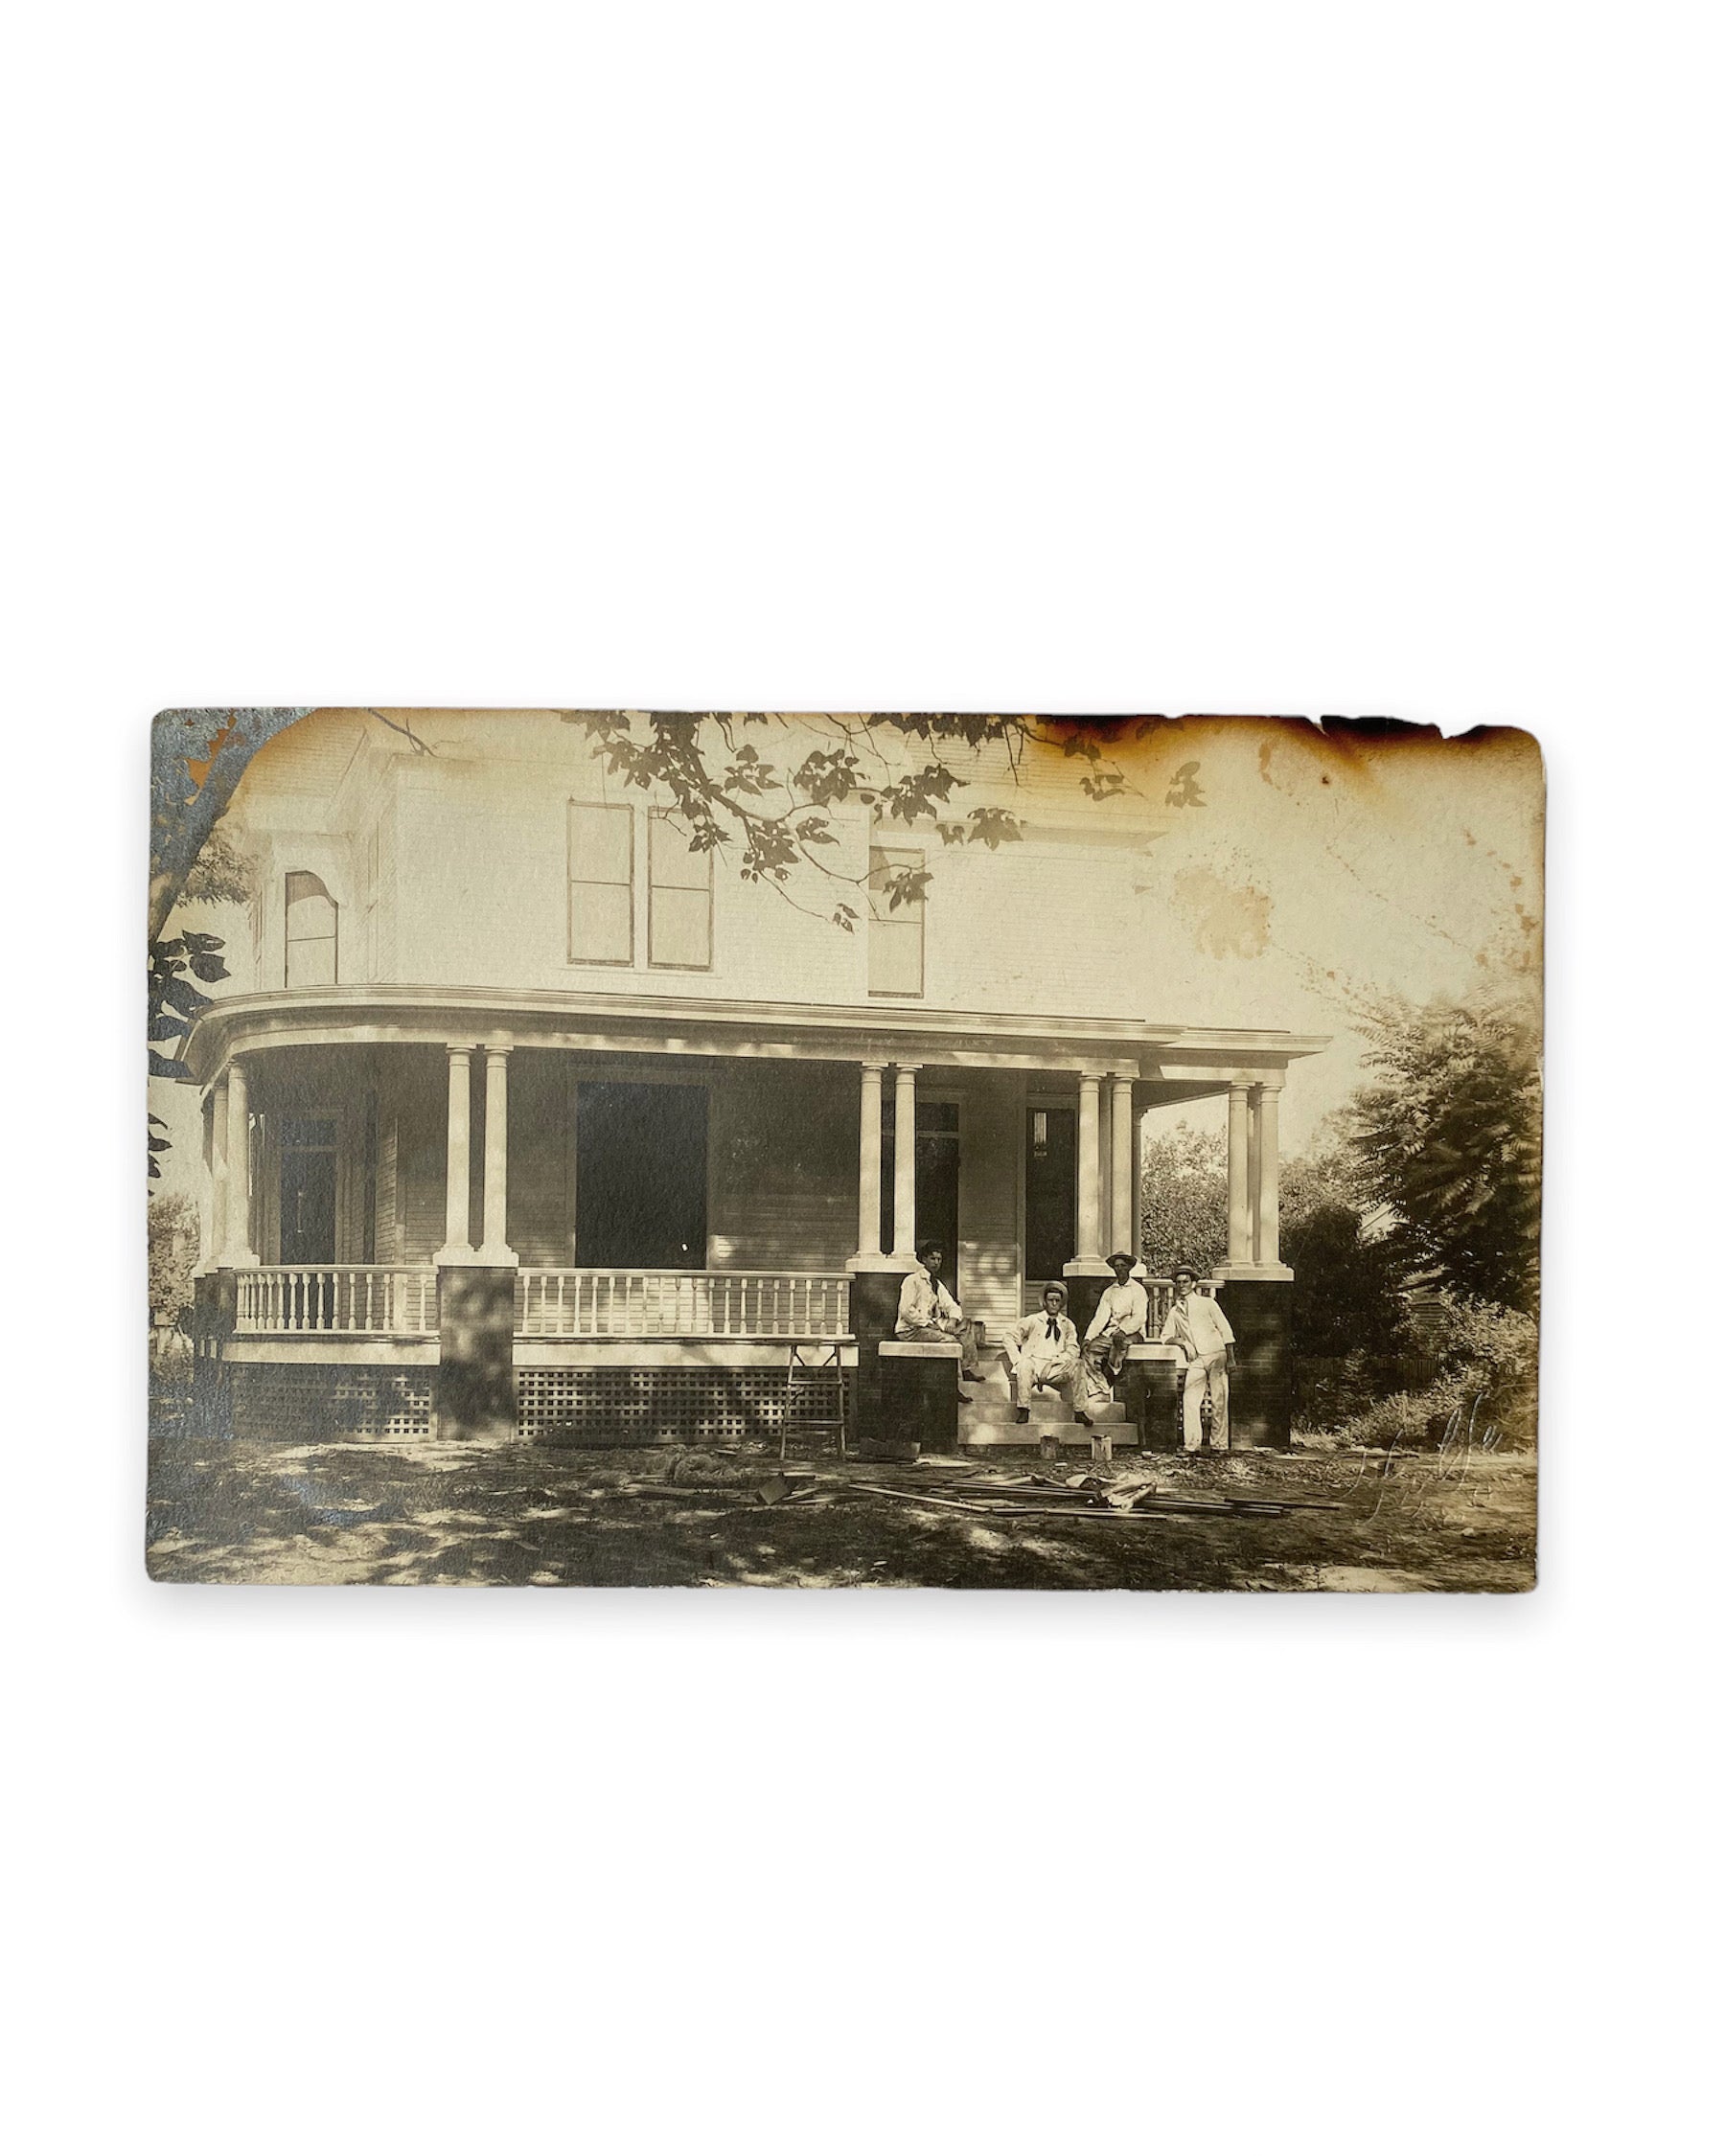 Group of Painters Posing in Front of Home RPPC